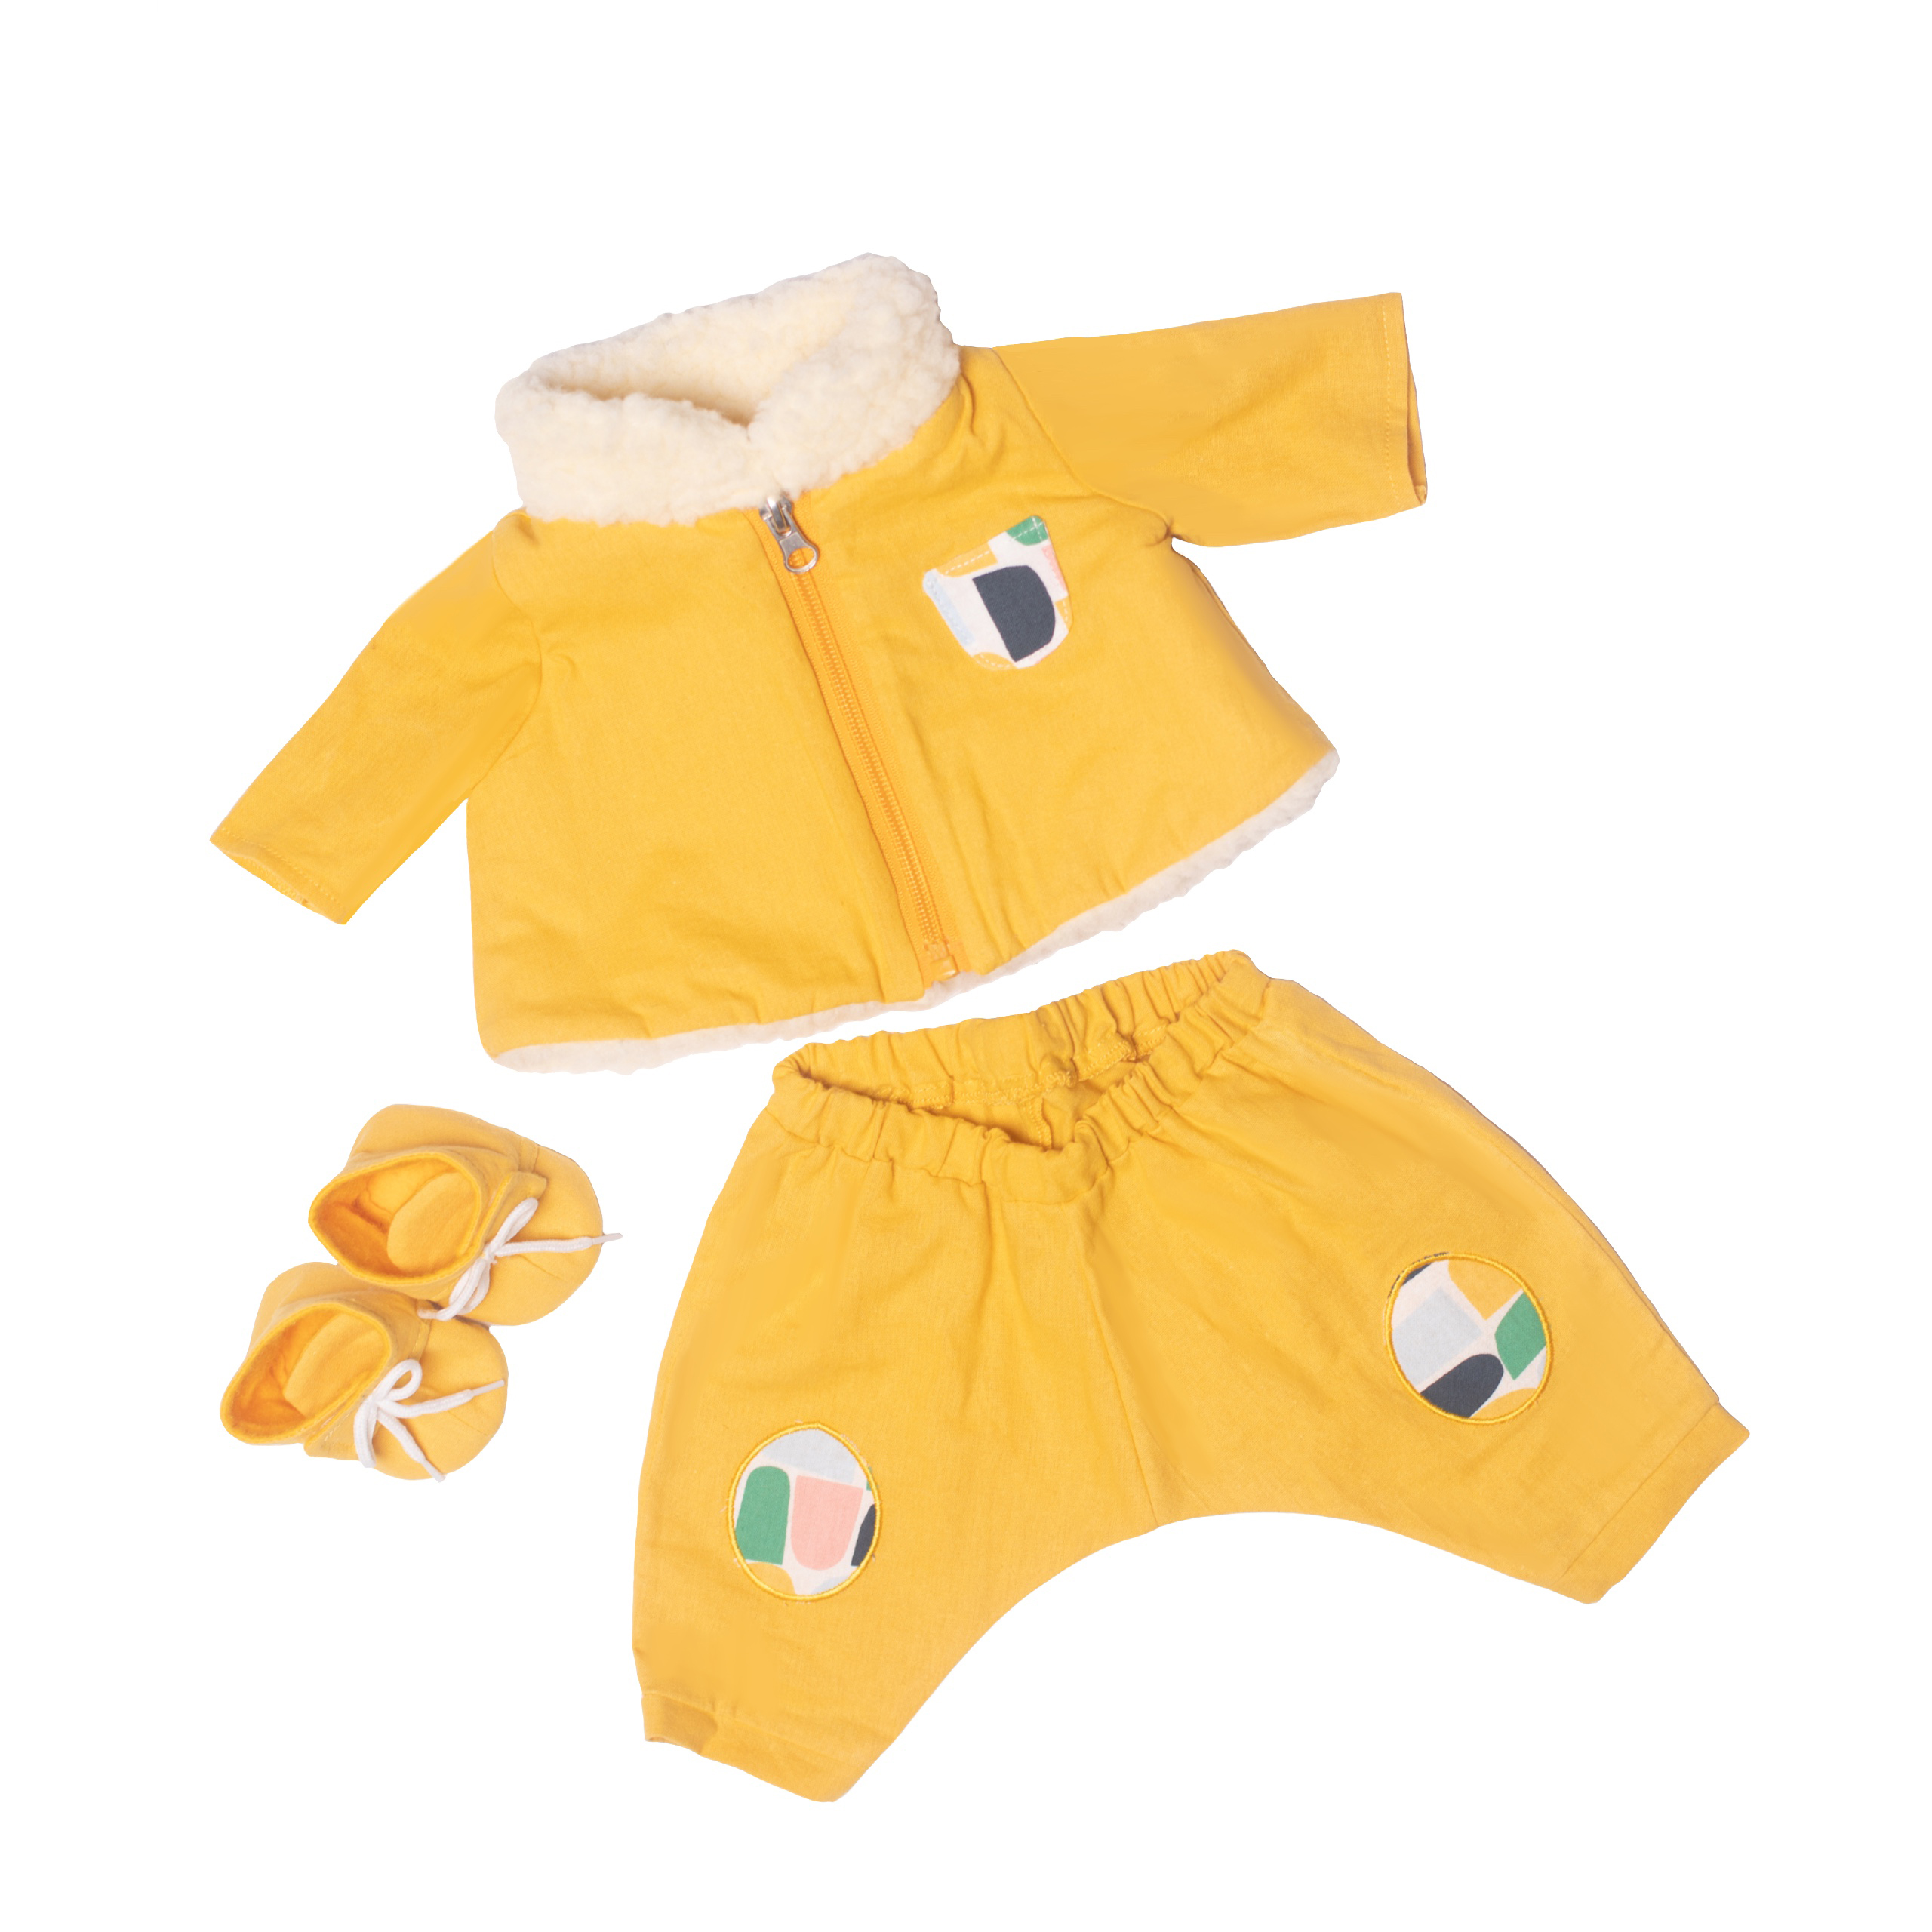 Baby toys rubens barn doll clothes outdoor outfit baby